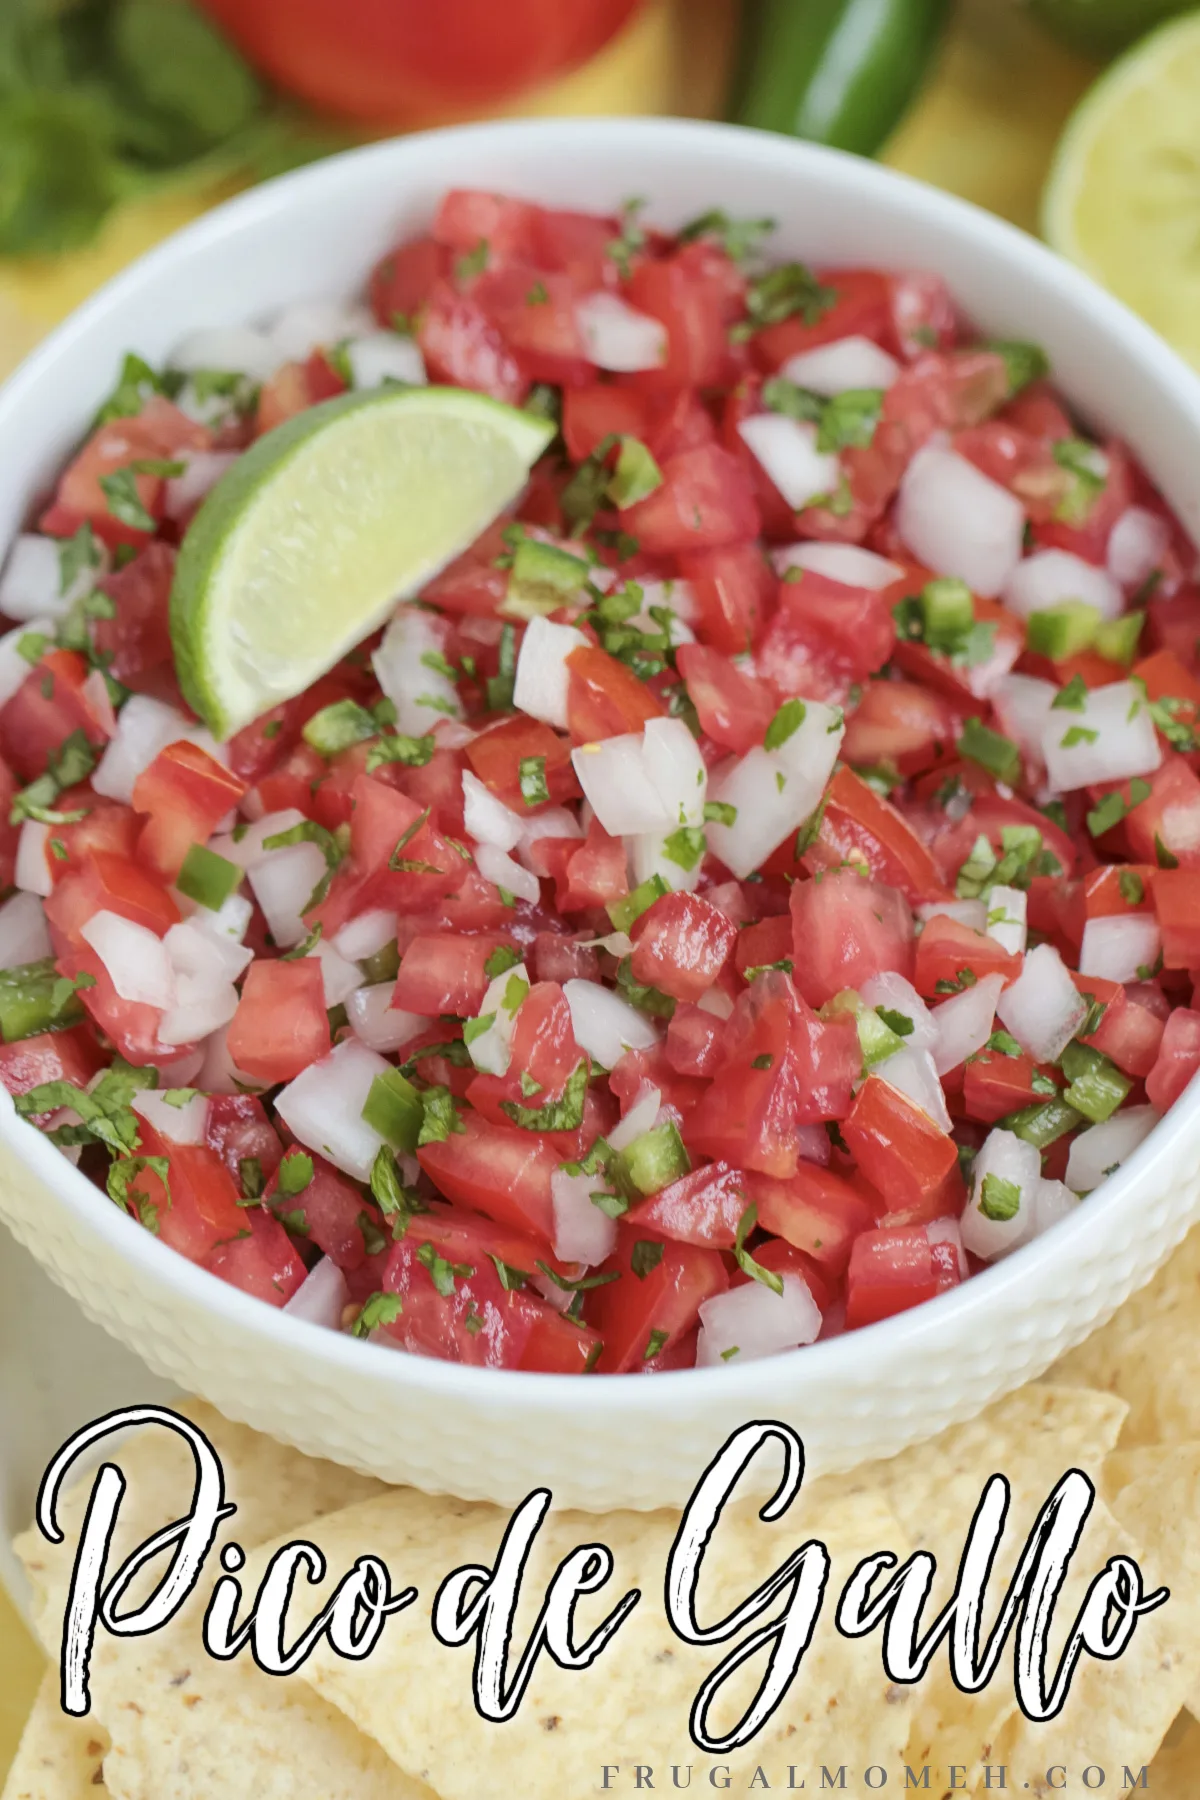 Making amazing pico de gallo at home is easier than you think. This classic Mexican condiment that is sure to win over any crowd!